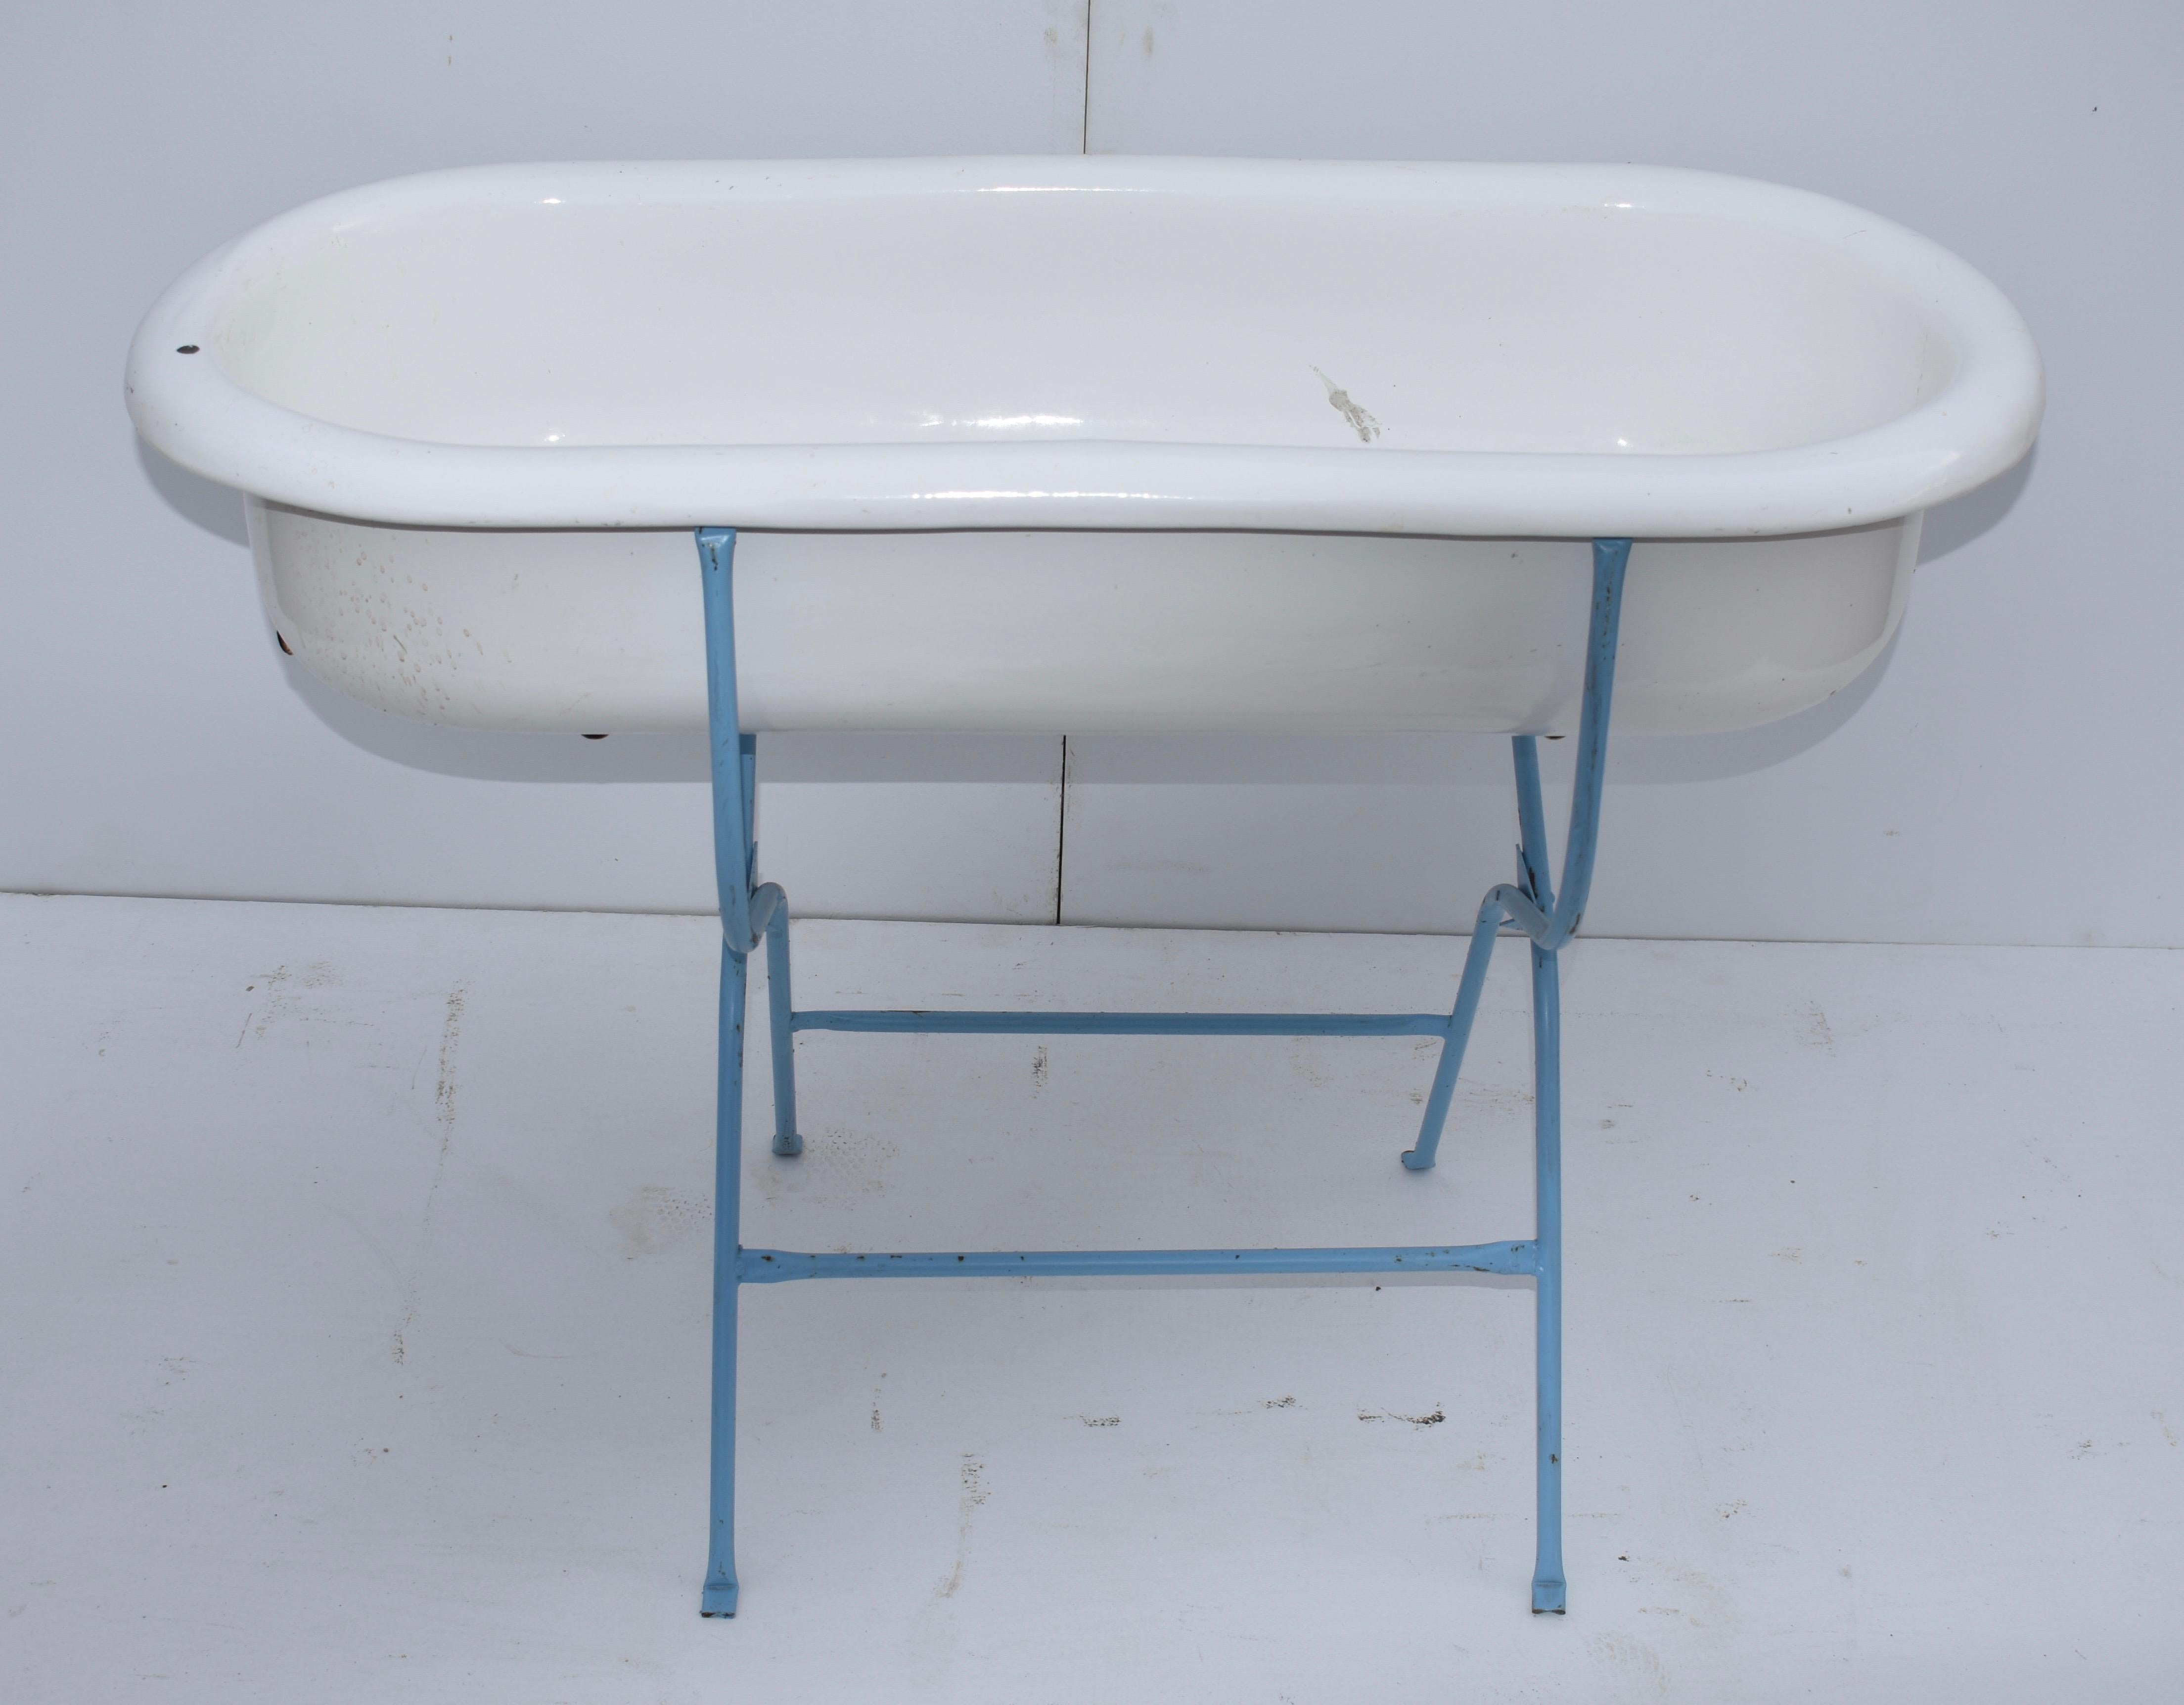 This is a charming porcelain enameled baby bath by Lampart of Hungary, mounted on an original folding wrought iron stand, recently re-painted in blue. Spring will be here before you know it and this would be great filled with bottles of beer or wine